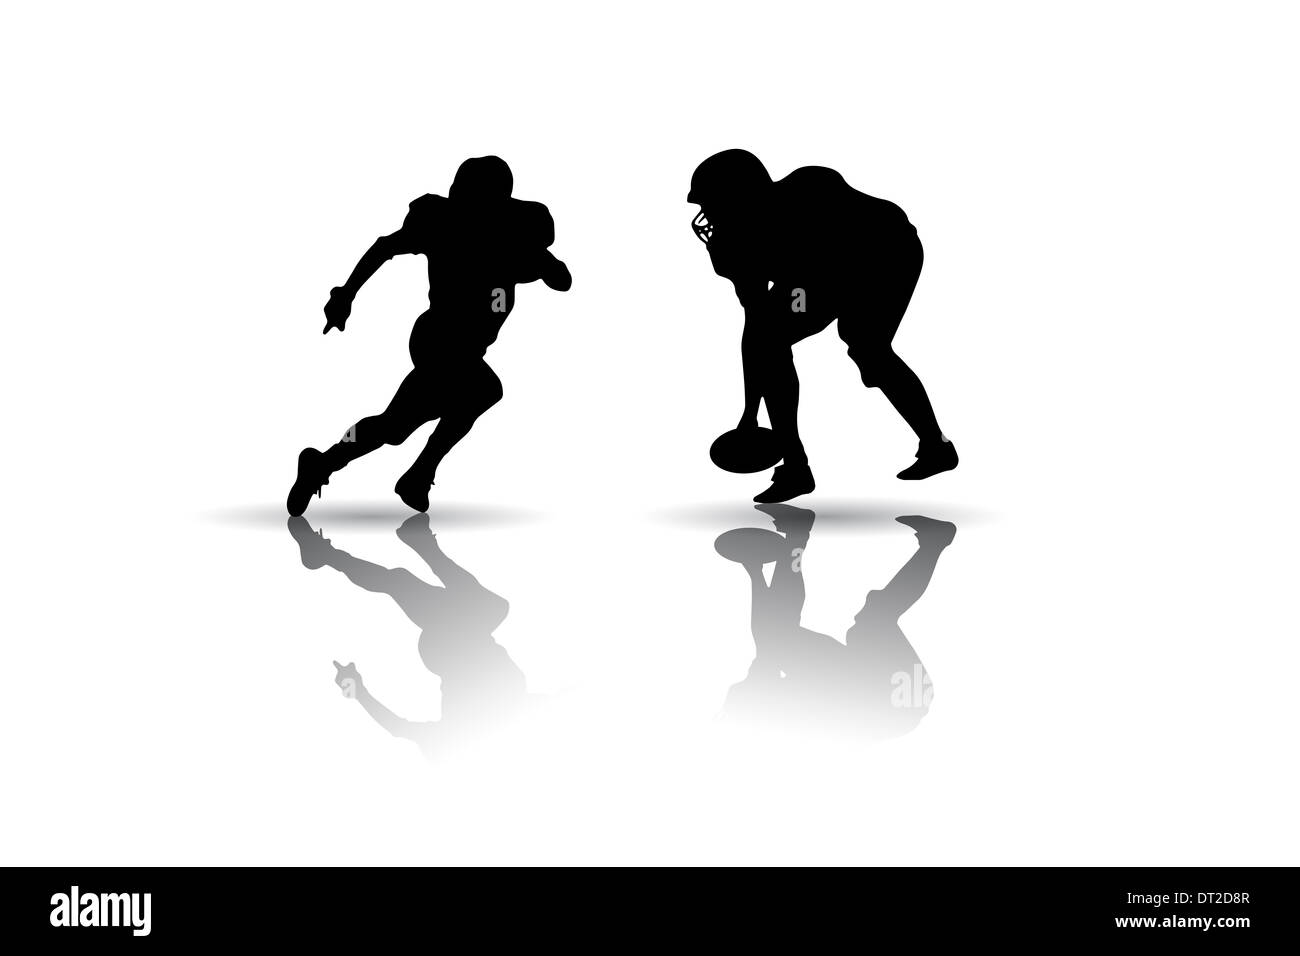 Vector of some American football players silhouettes Stock Photo - Alamy